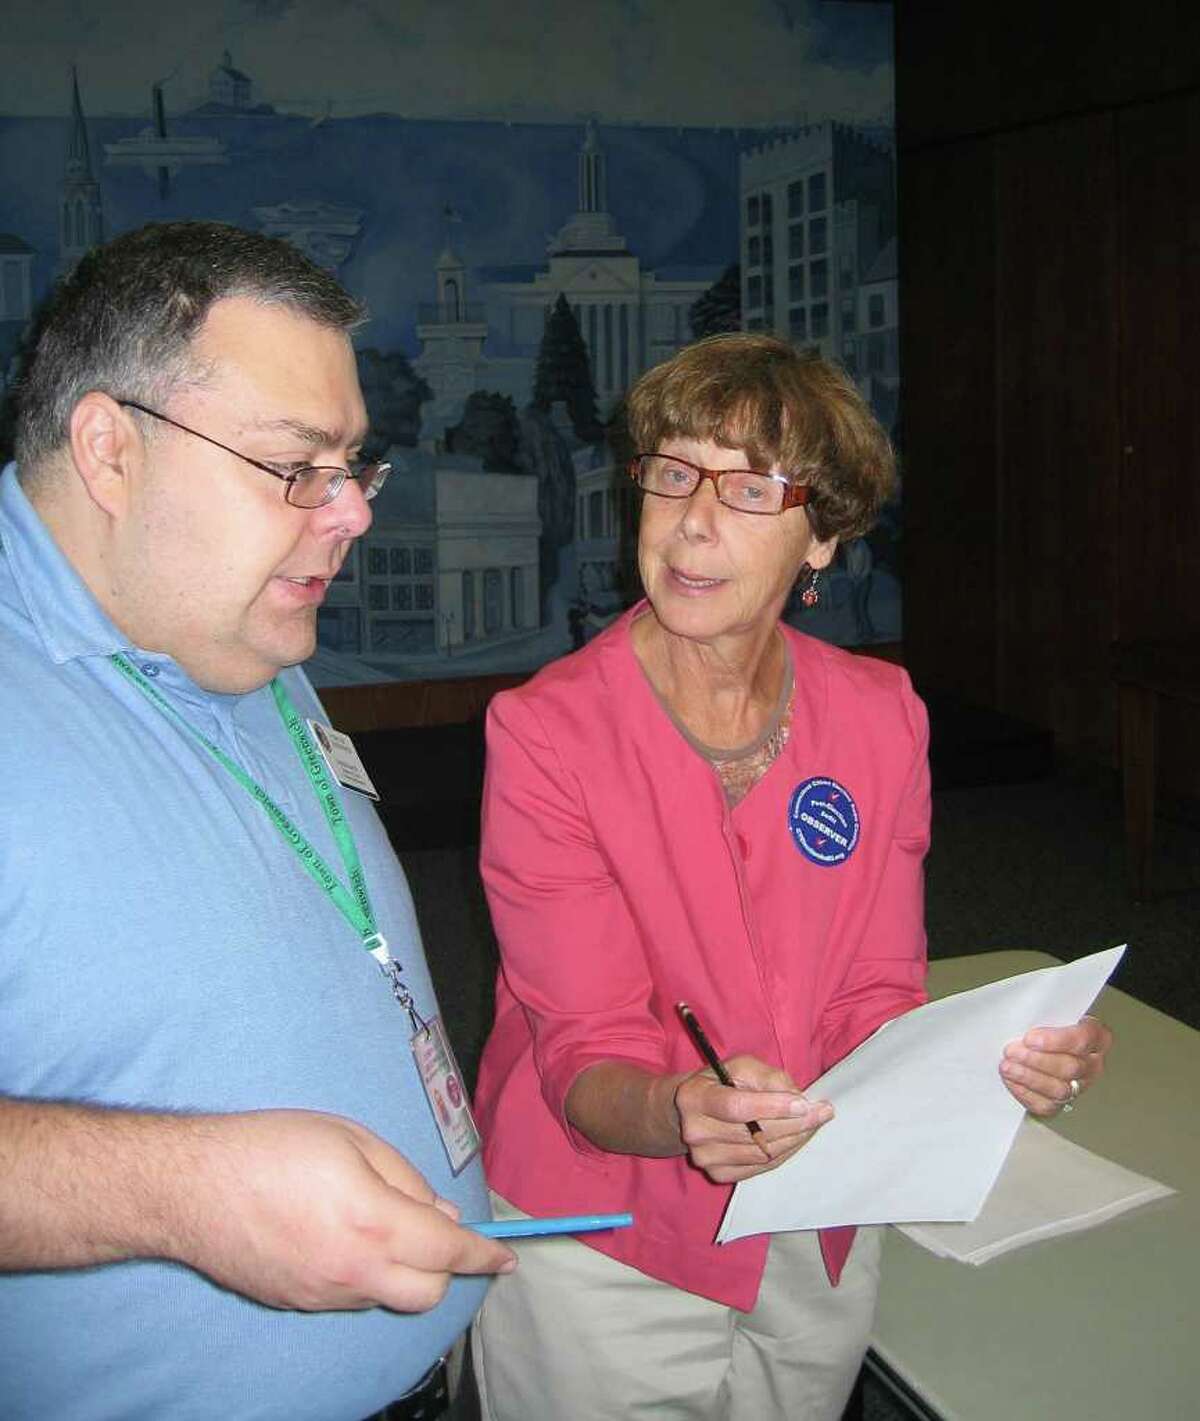 Republican Registrar of Voters Fred DeCaro III answers questions from Ellen McBride, a volunteer post-election observer from the Connecticut Citizen Election Audit Coalition, Wednesday at Town Hall. The state-mandated audit showed no major irregularities in the Aug. 10 primary results from Riverside School.